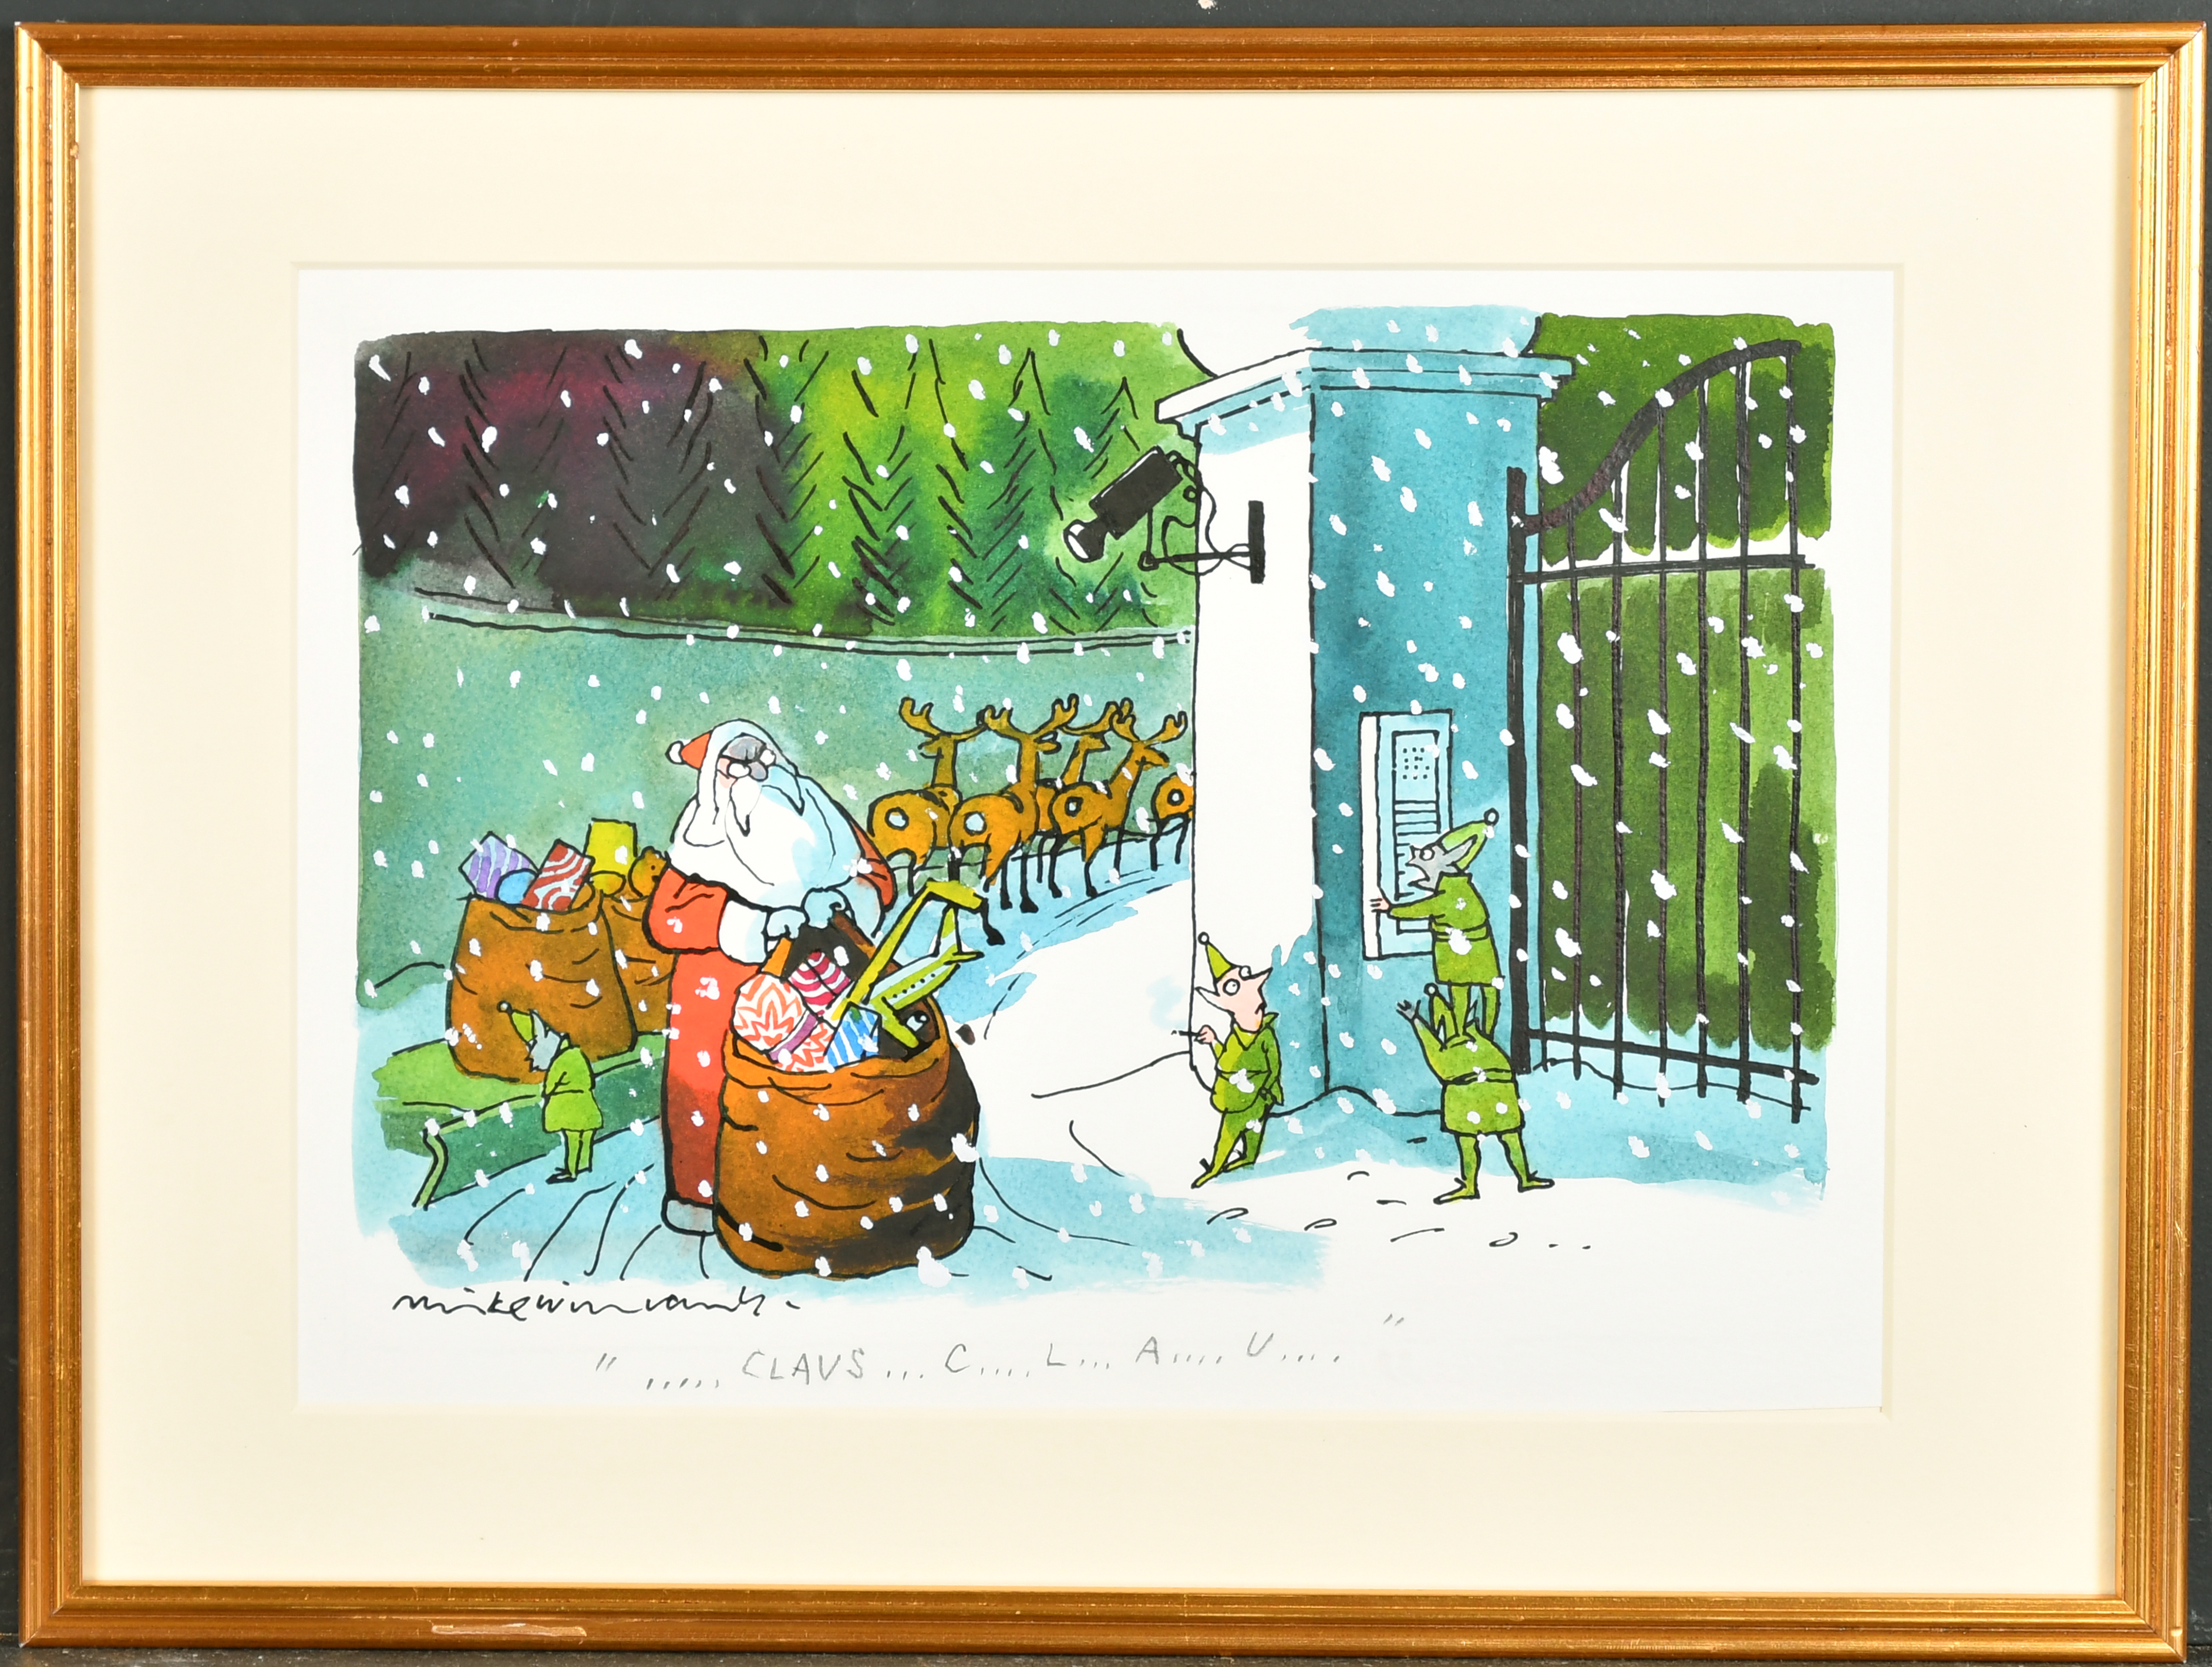 Mike Williams (1940- ) British. "!..... Claus...C...L...A...U....", Watercolour and ink, Signed - Image 2 of 4